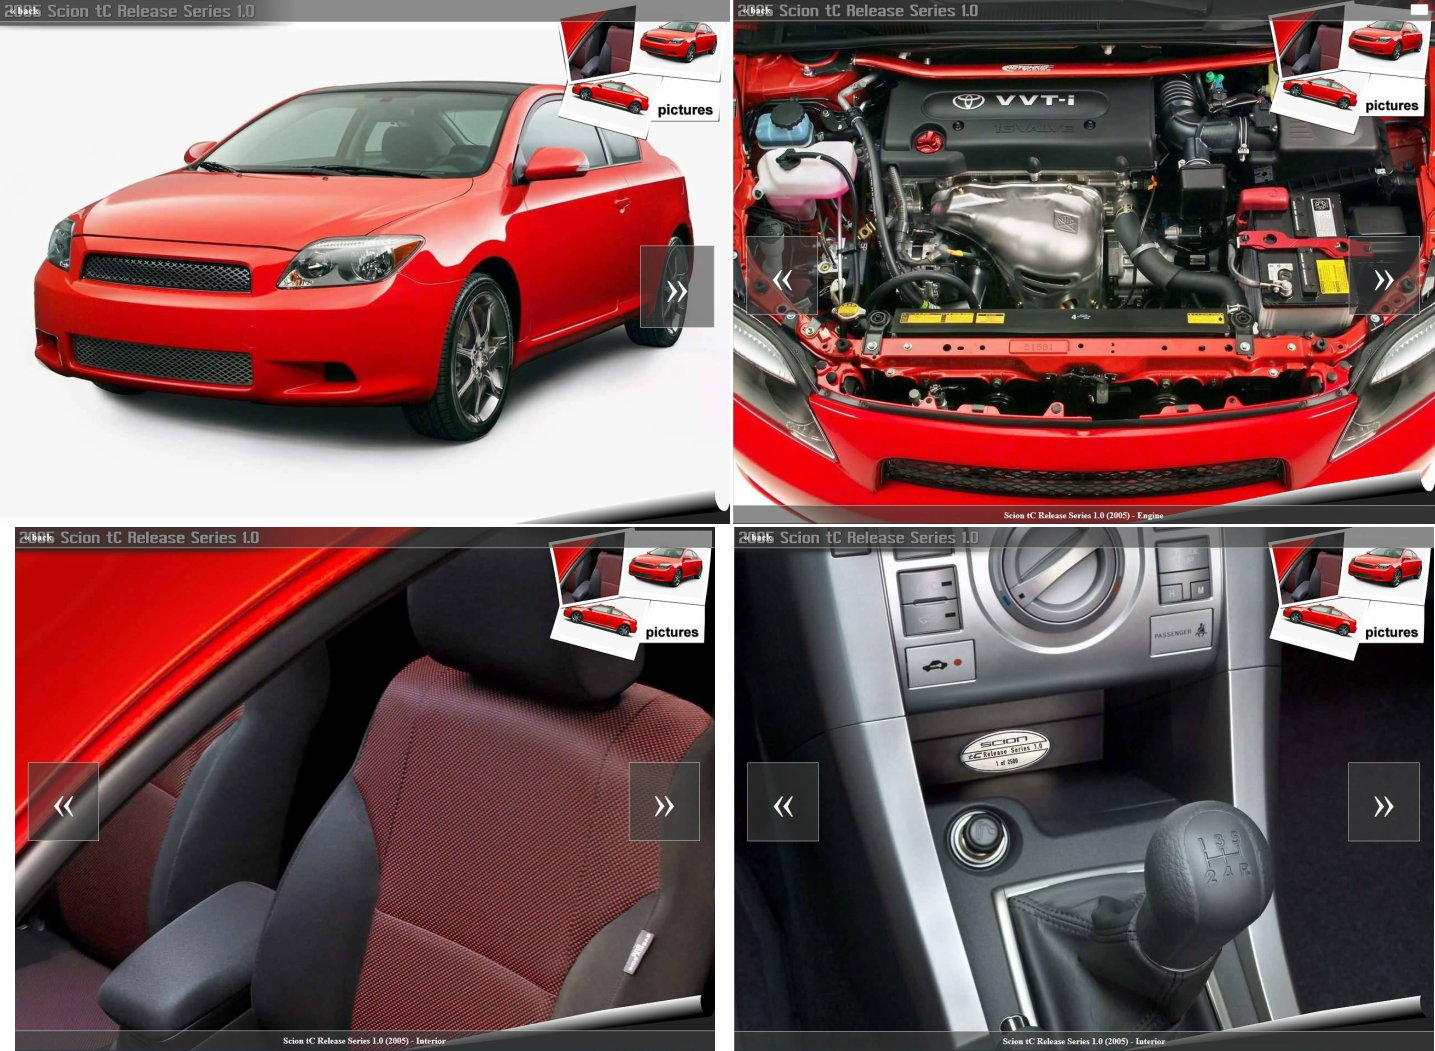 2005 tC Release Series 1.0 Absolute Red- Limited Edition of 2,500 Units.